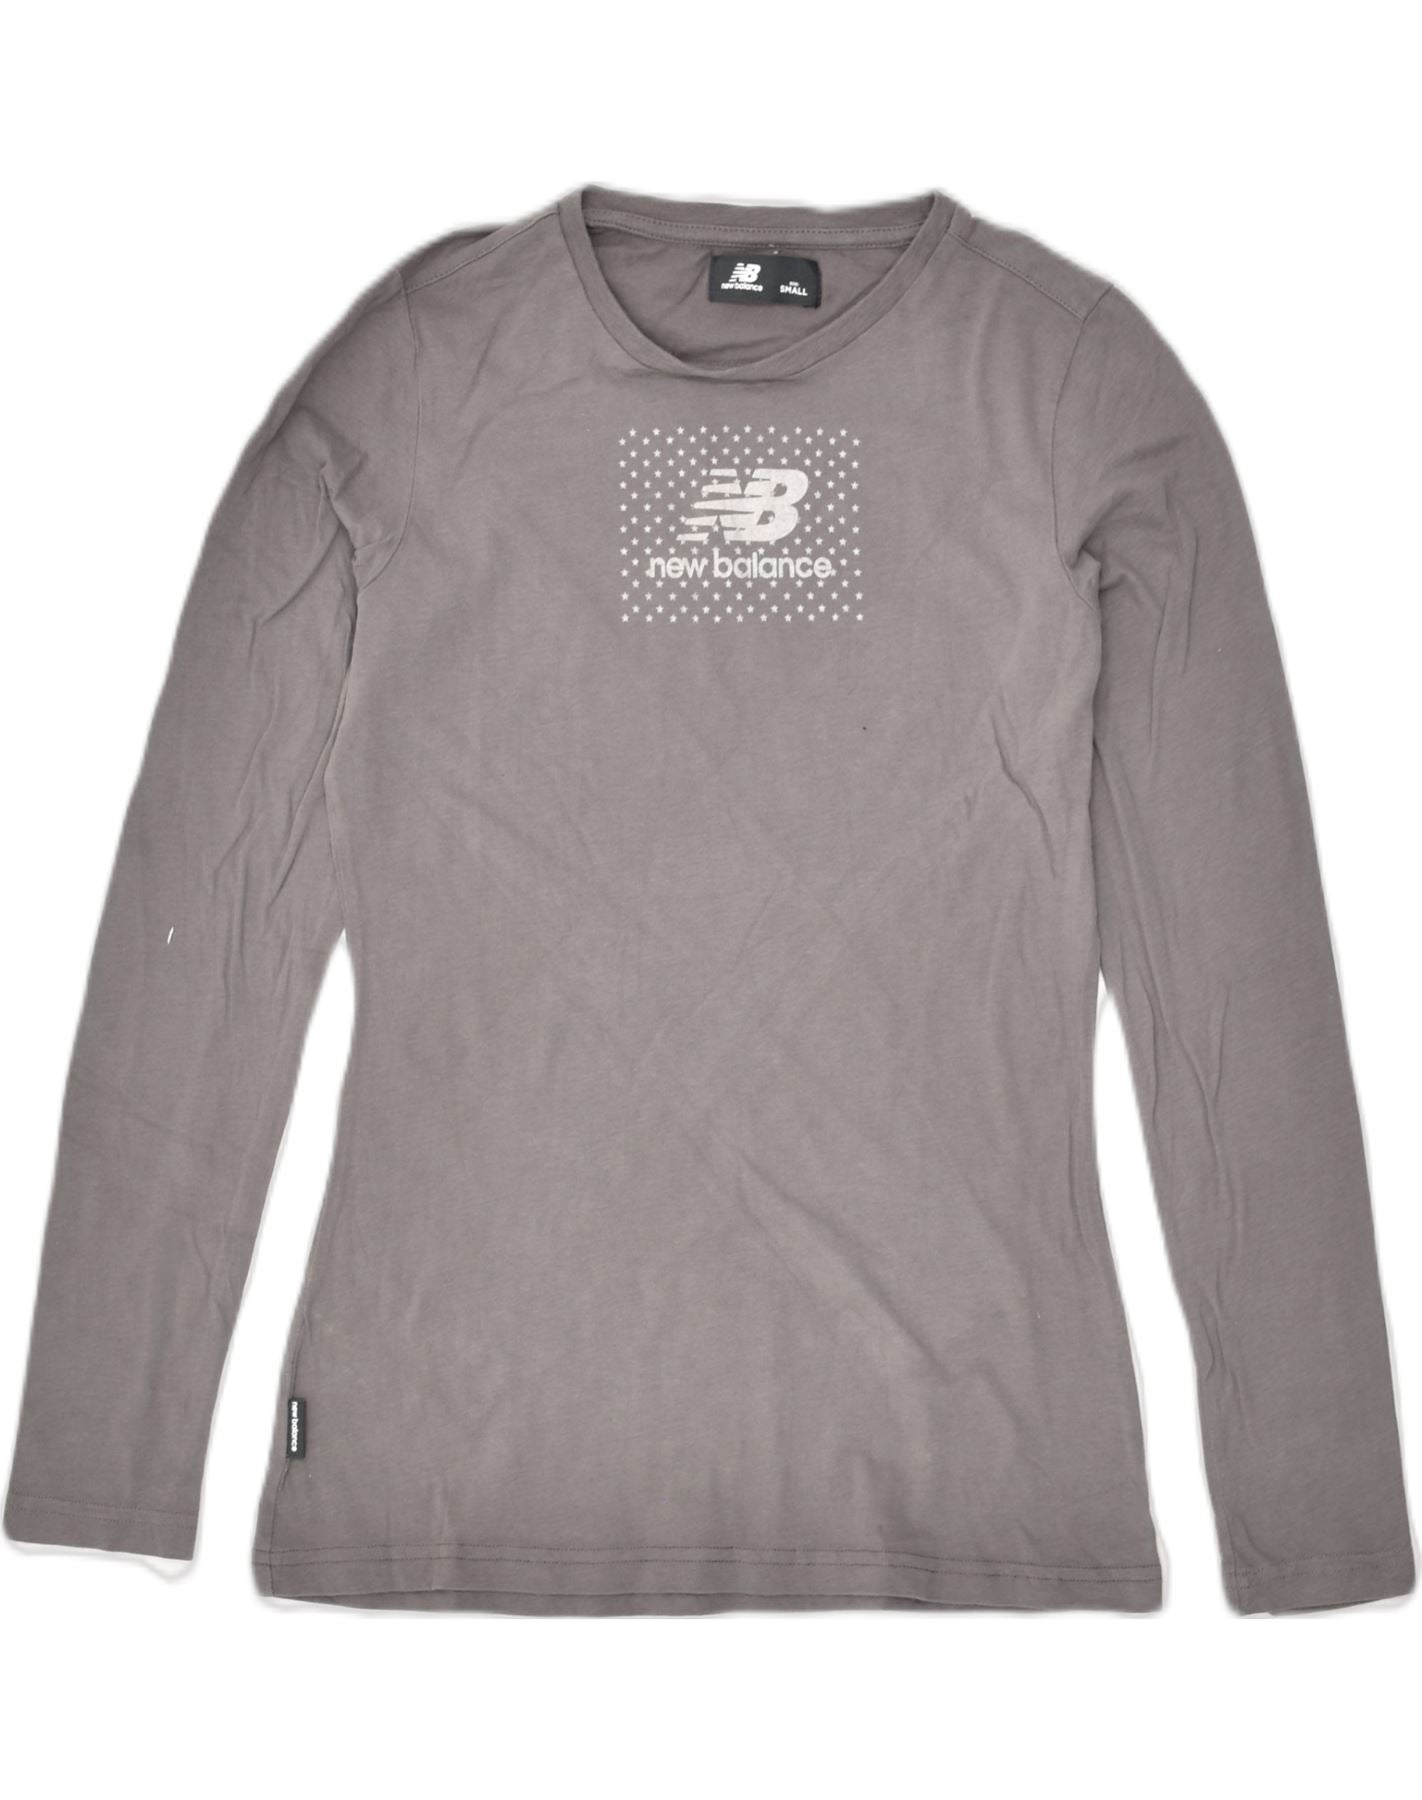 NEW BALANCE Womens Graphic Top Long Sleeve UK 10 Small Grey Cotton